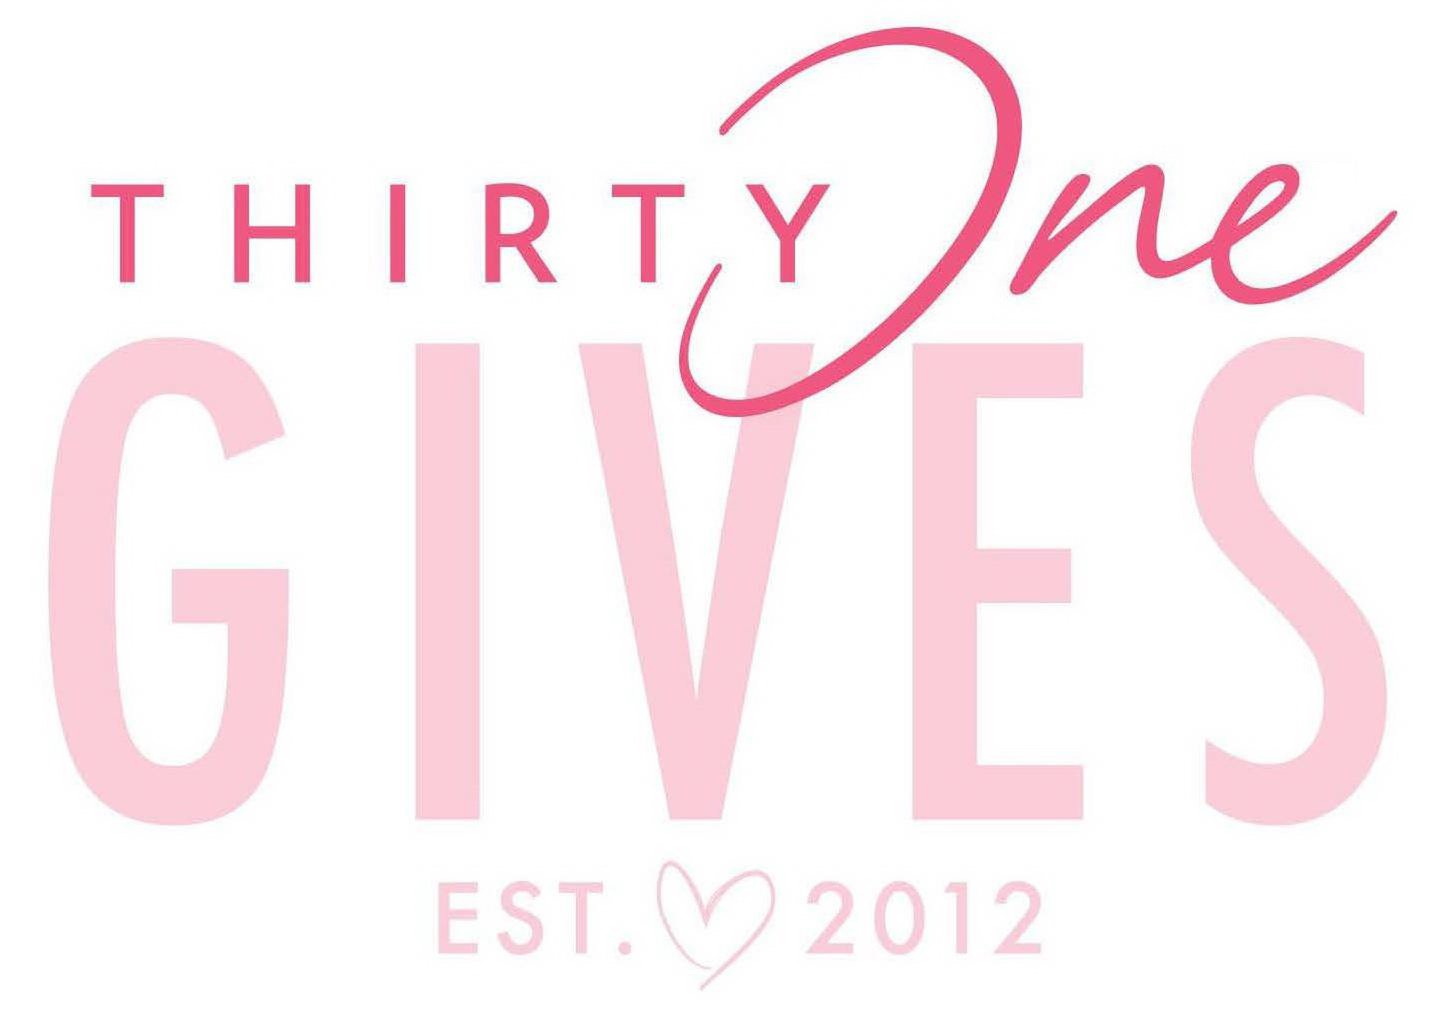  THIRTY ONE GIVES EST. 2012